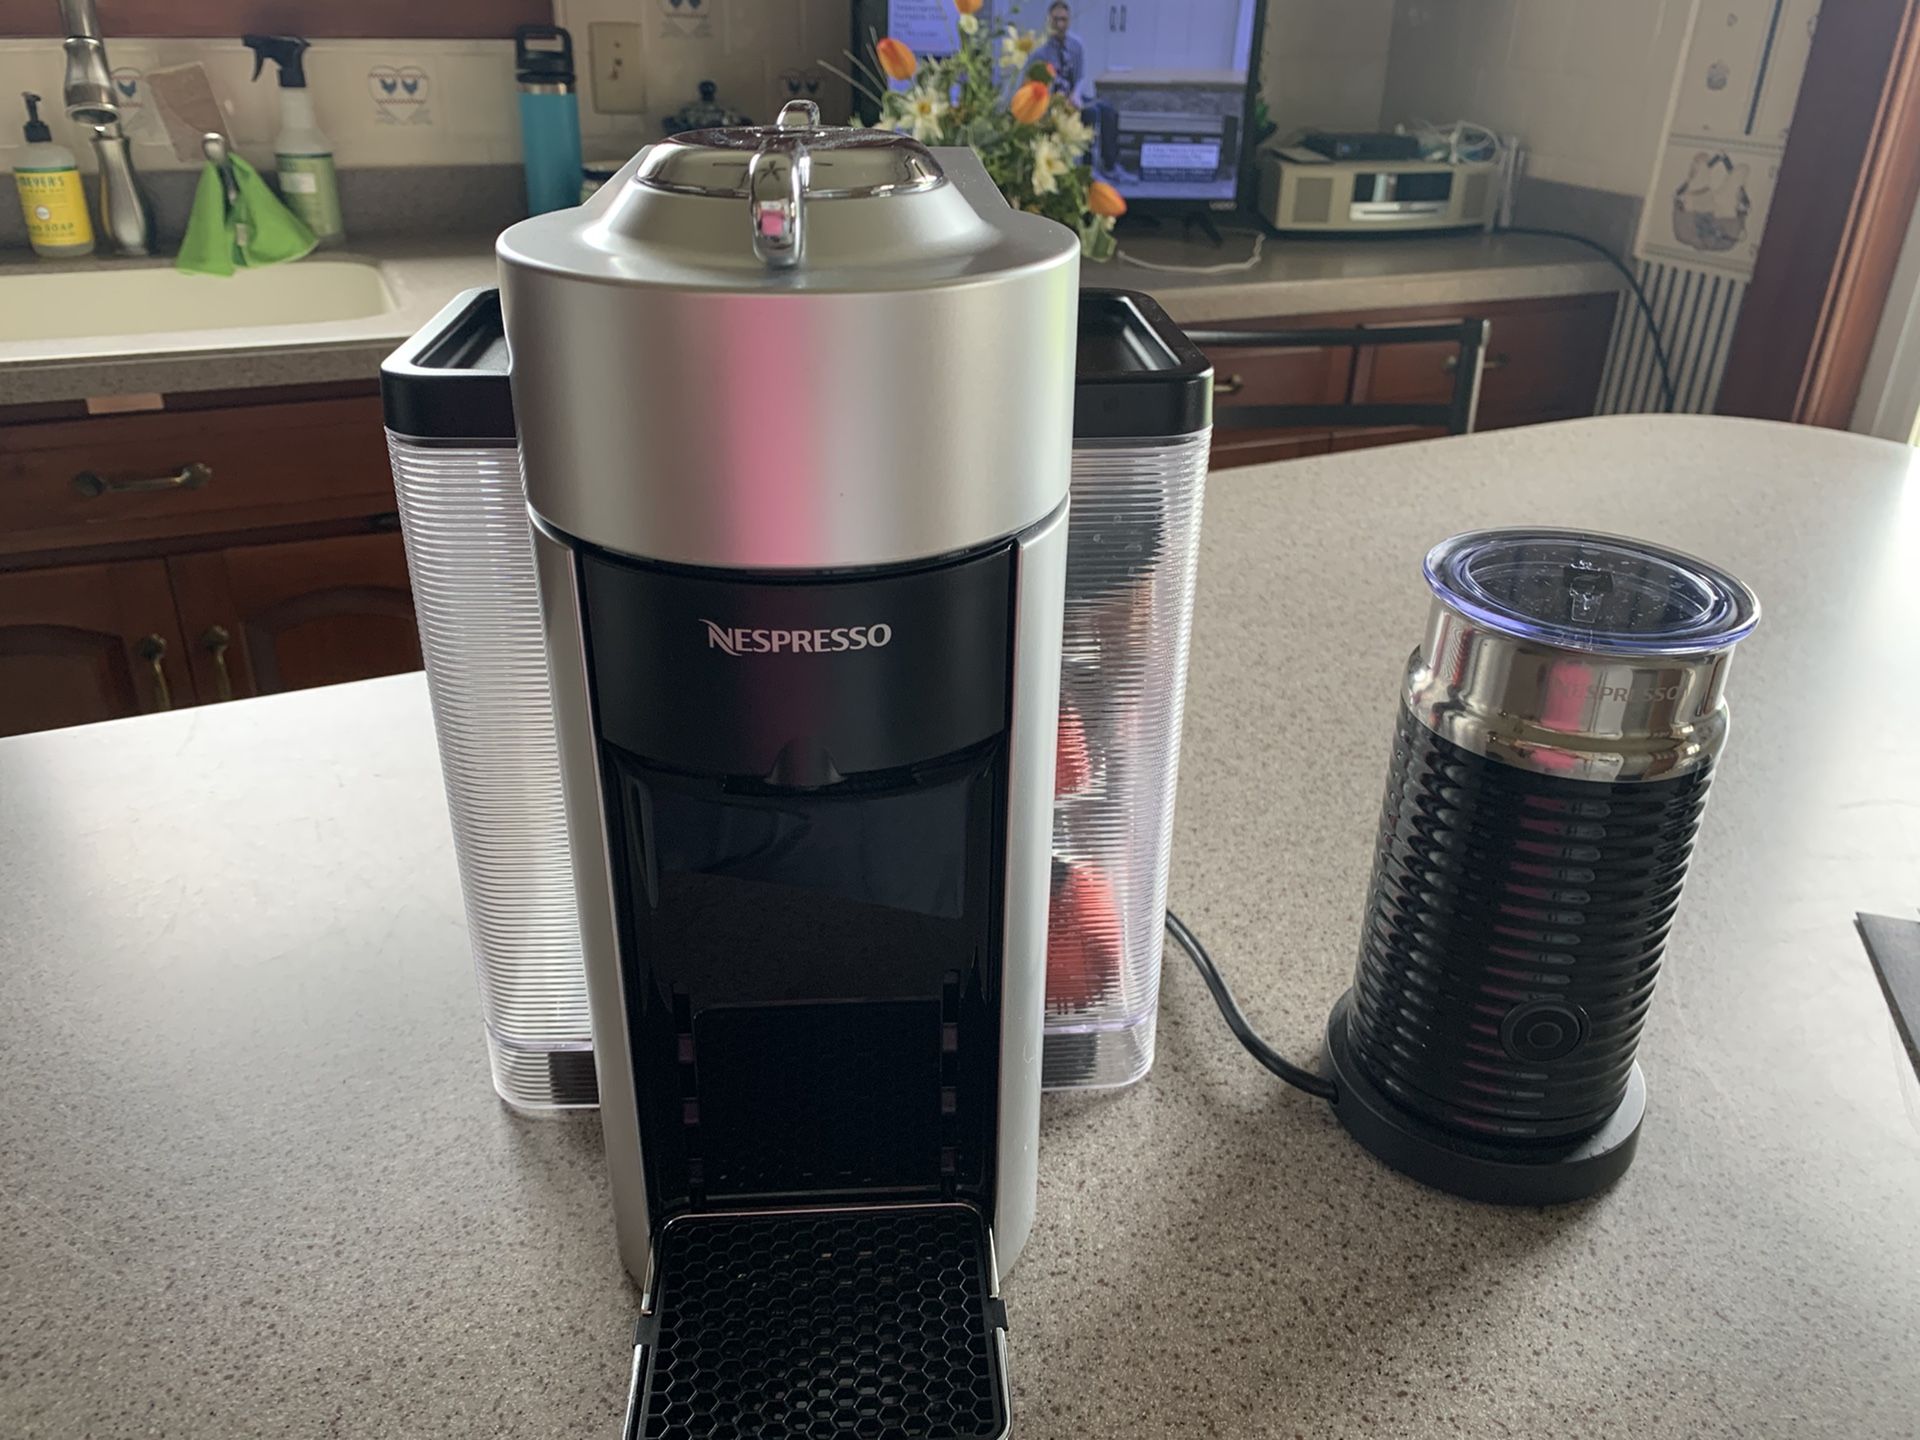 Nespresso Vertuo Coffee Maker with Milk Frother